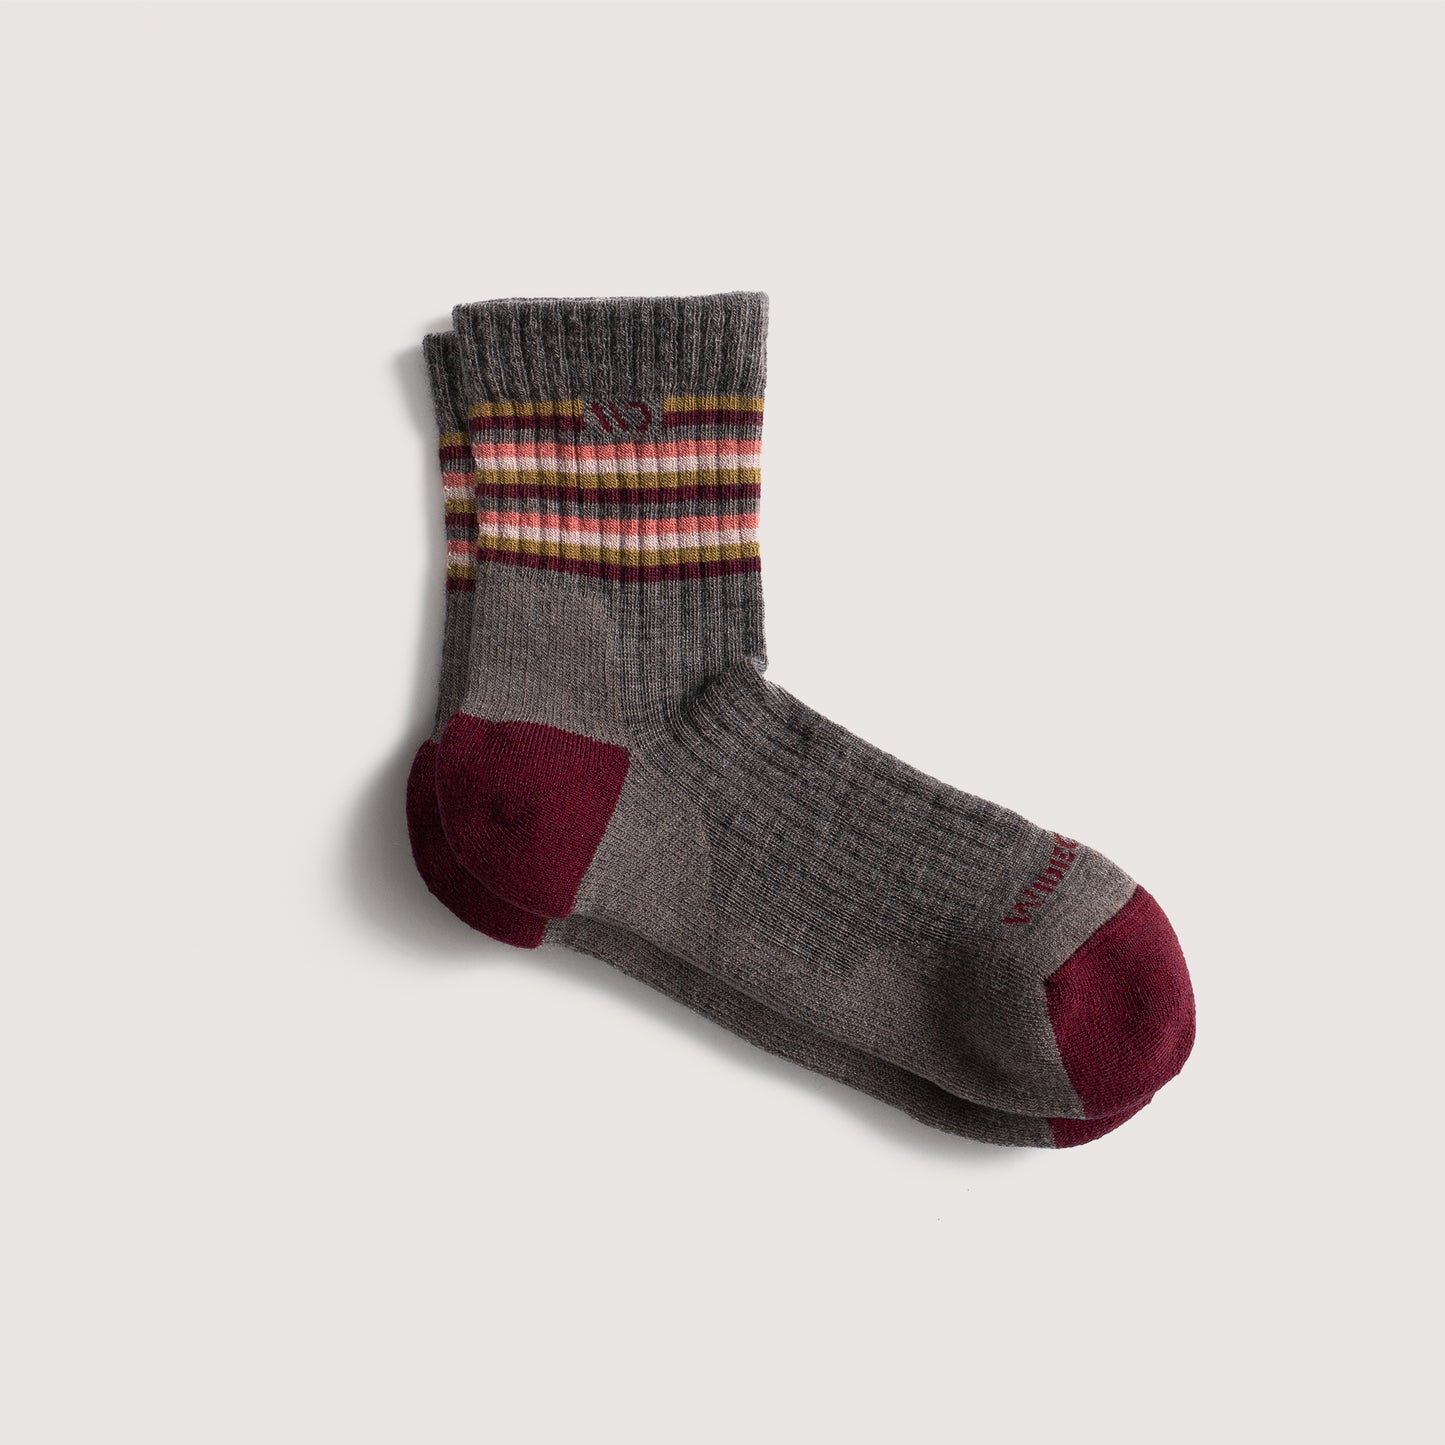 Flat socks featuring maroon toe, taupe body, maroon logo and stripes on the cuff--Taupe